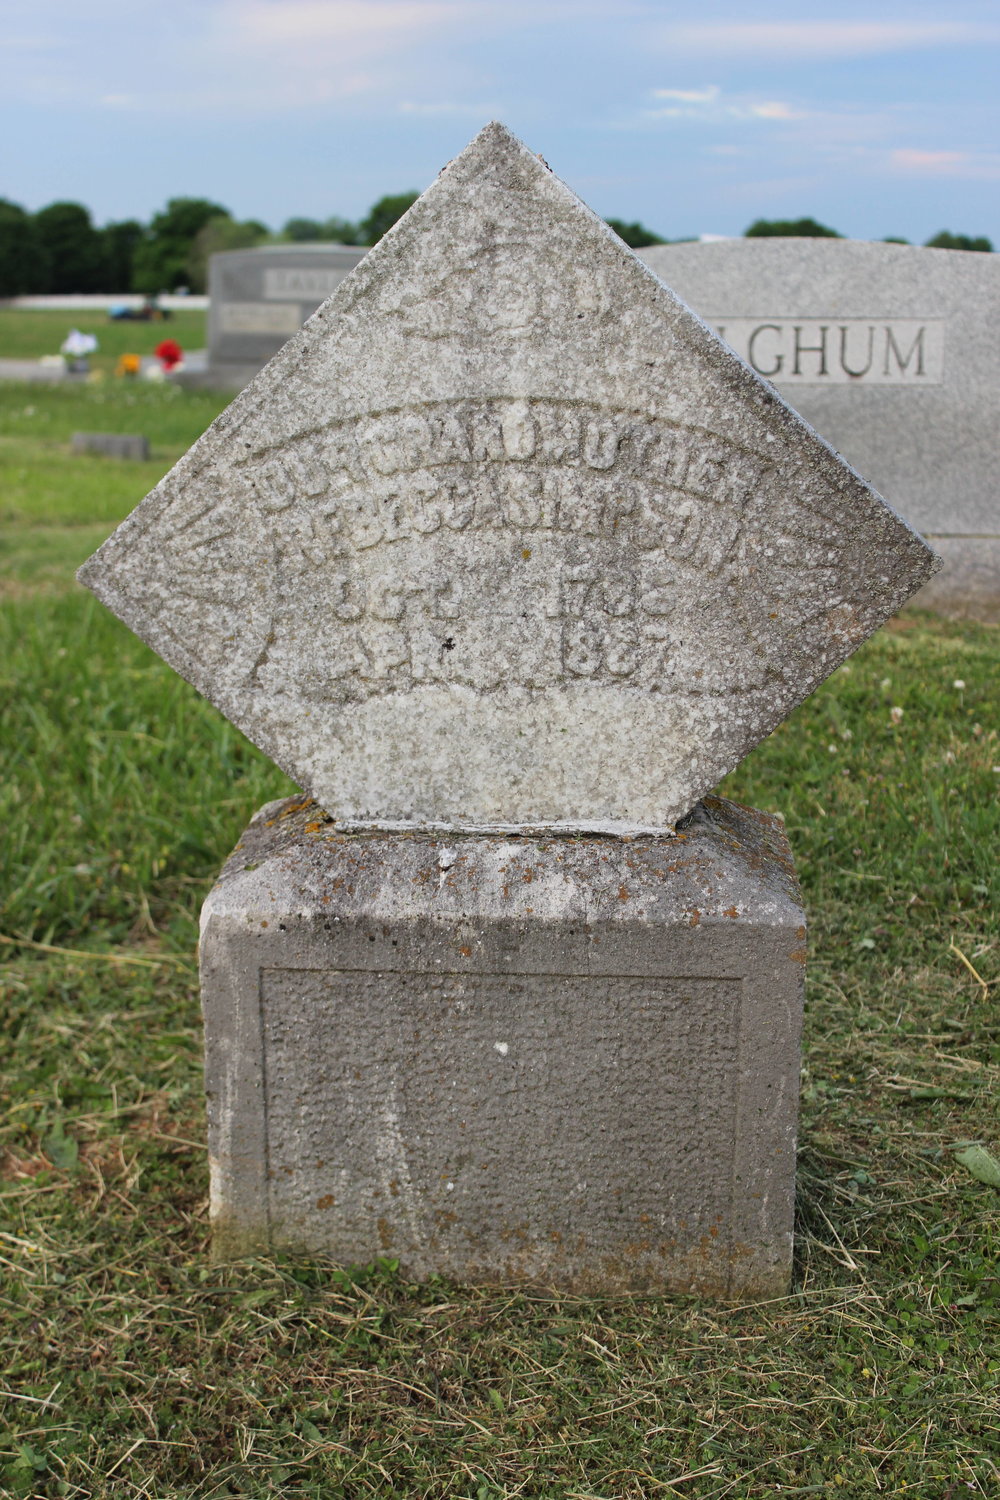 This tomb marks the place of Rebecca Simpson, the cemetery's namesake.